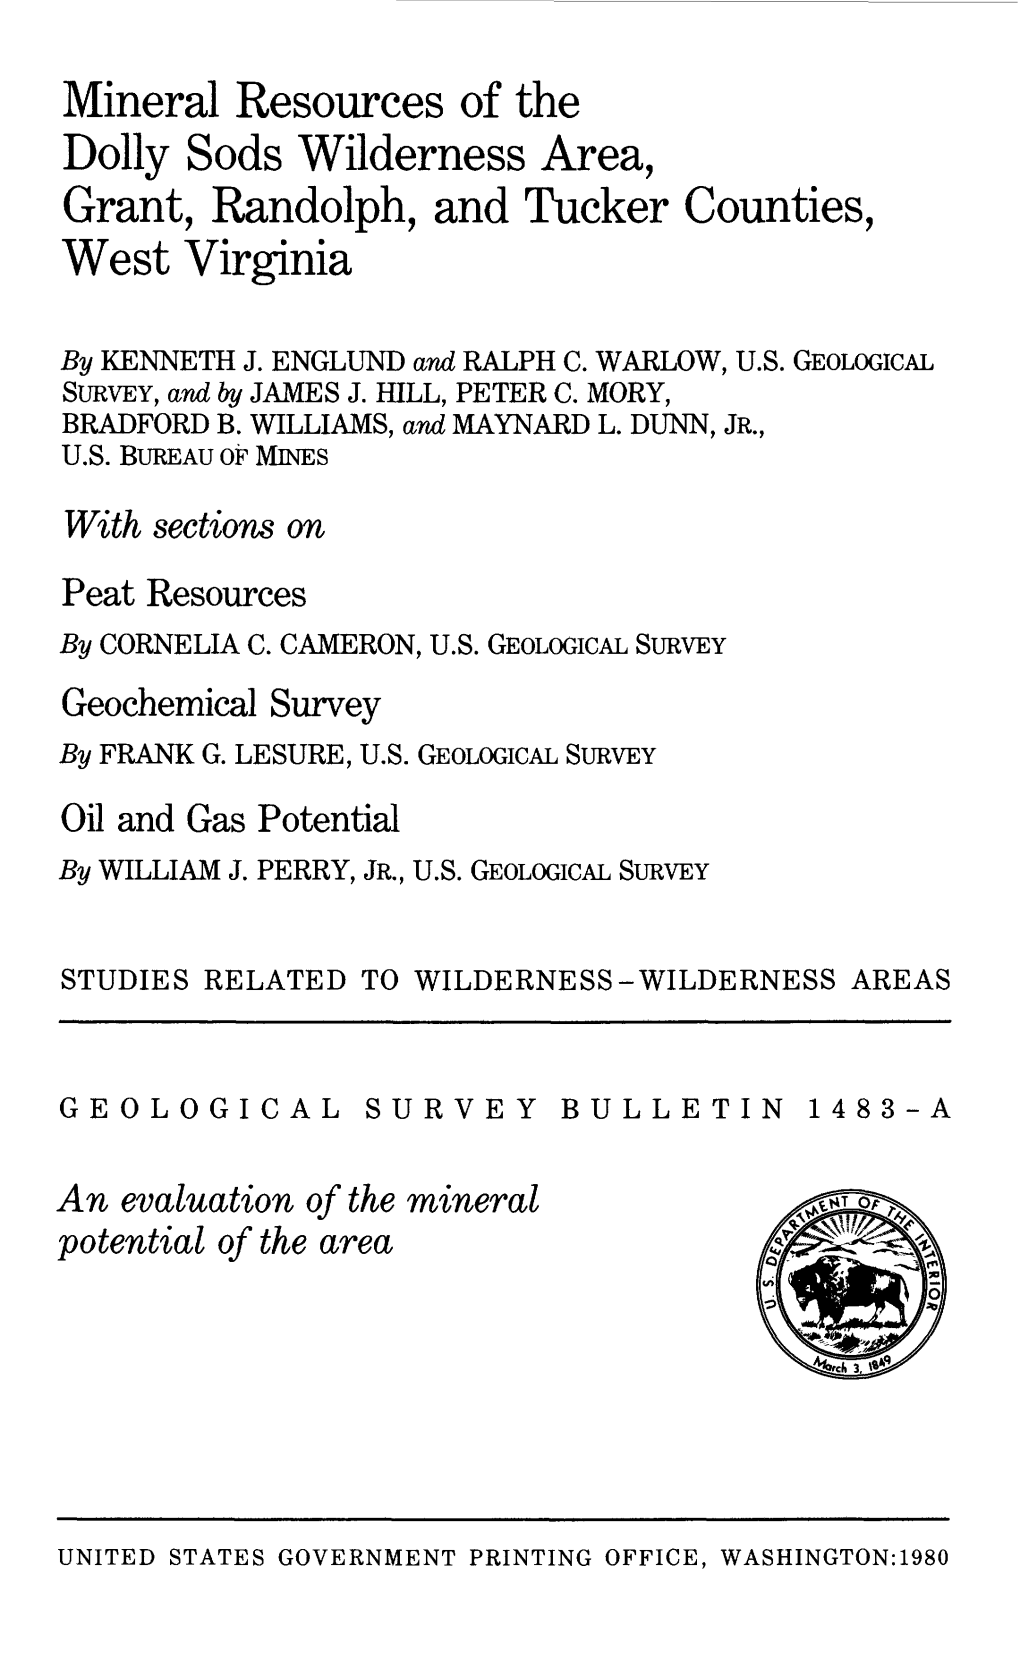 Mineral Resources of the Dolly Sods Wilderness Area, Grant, Randolph, and Tucker Counties, West Virginia